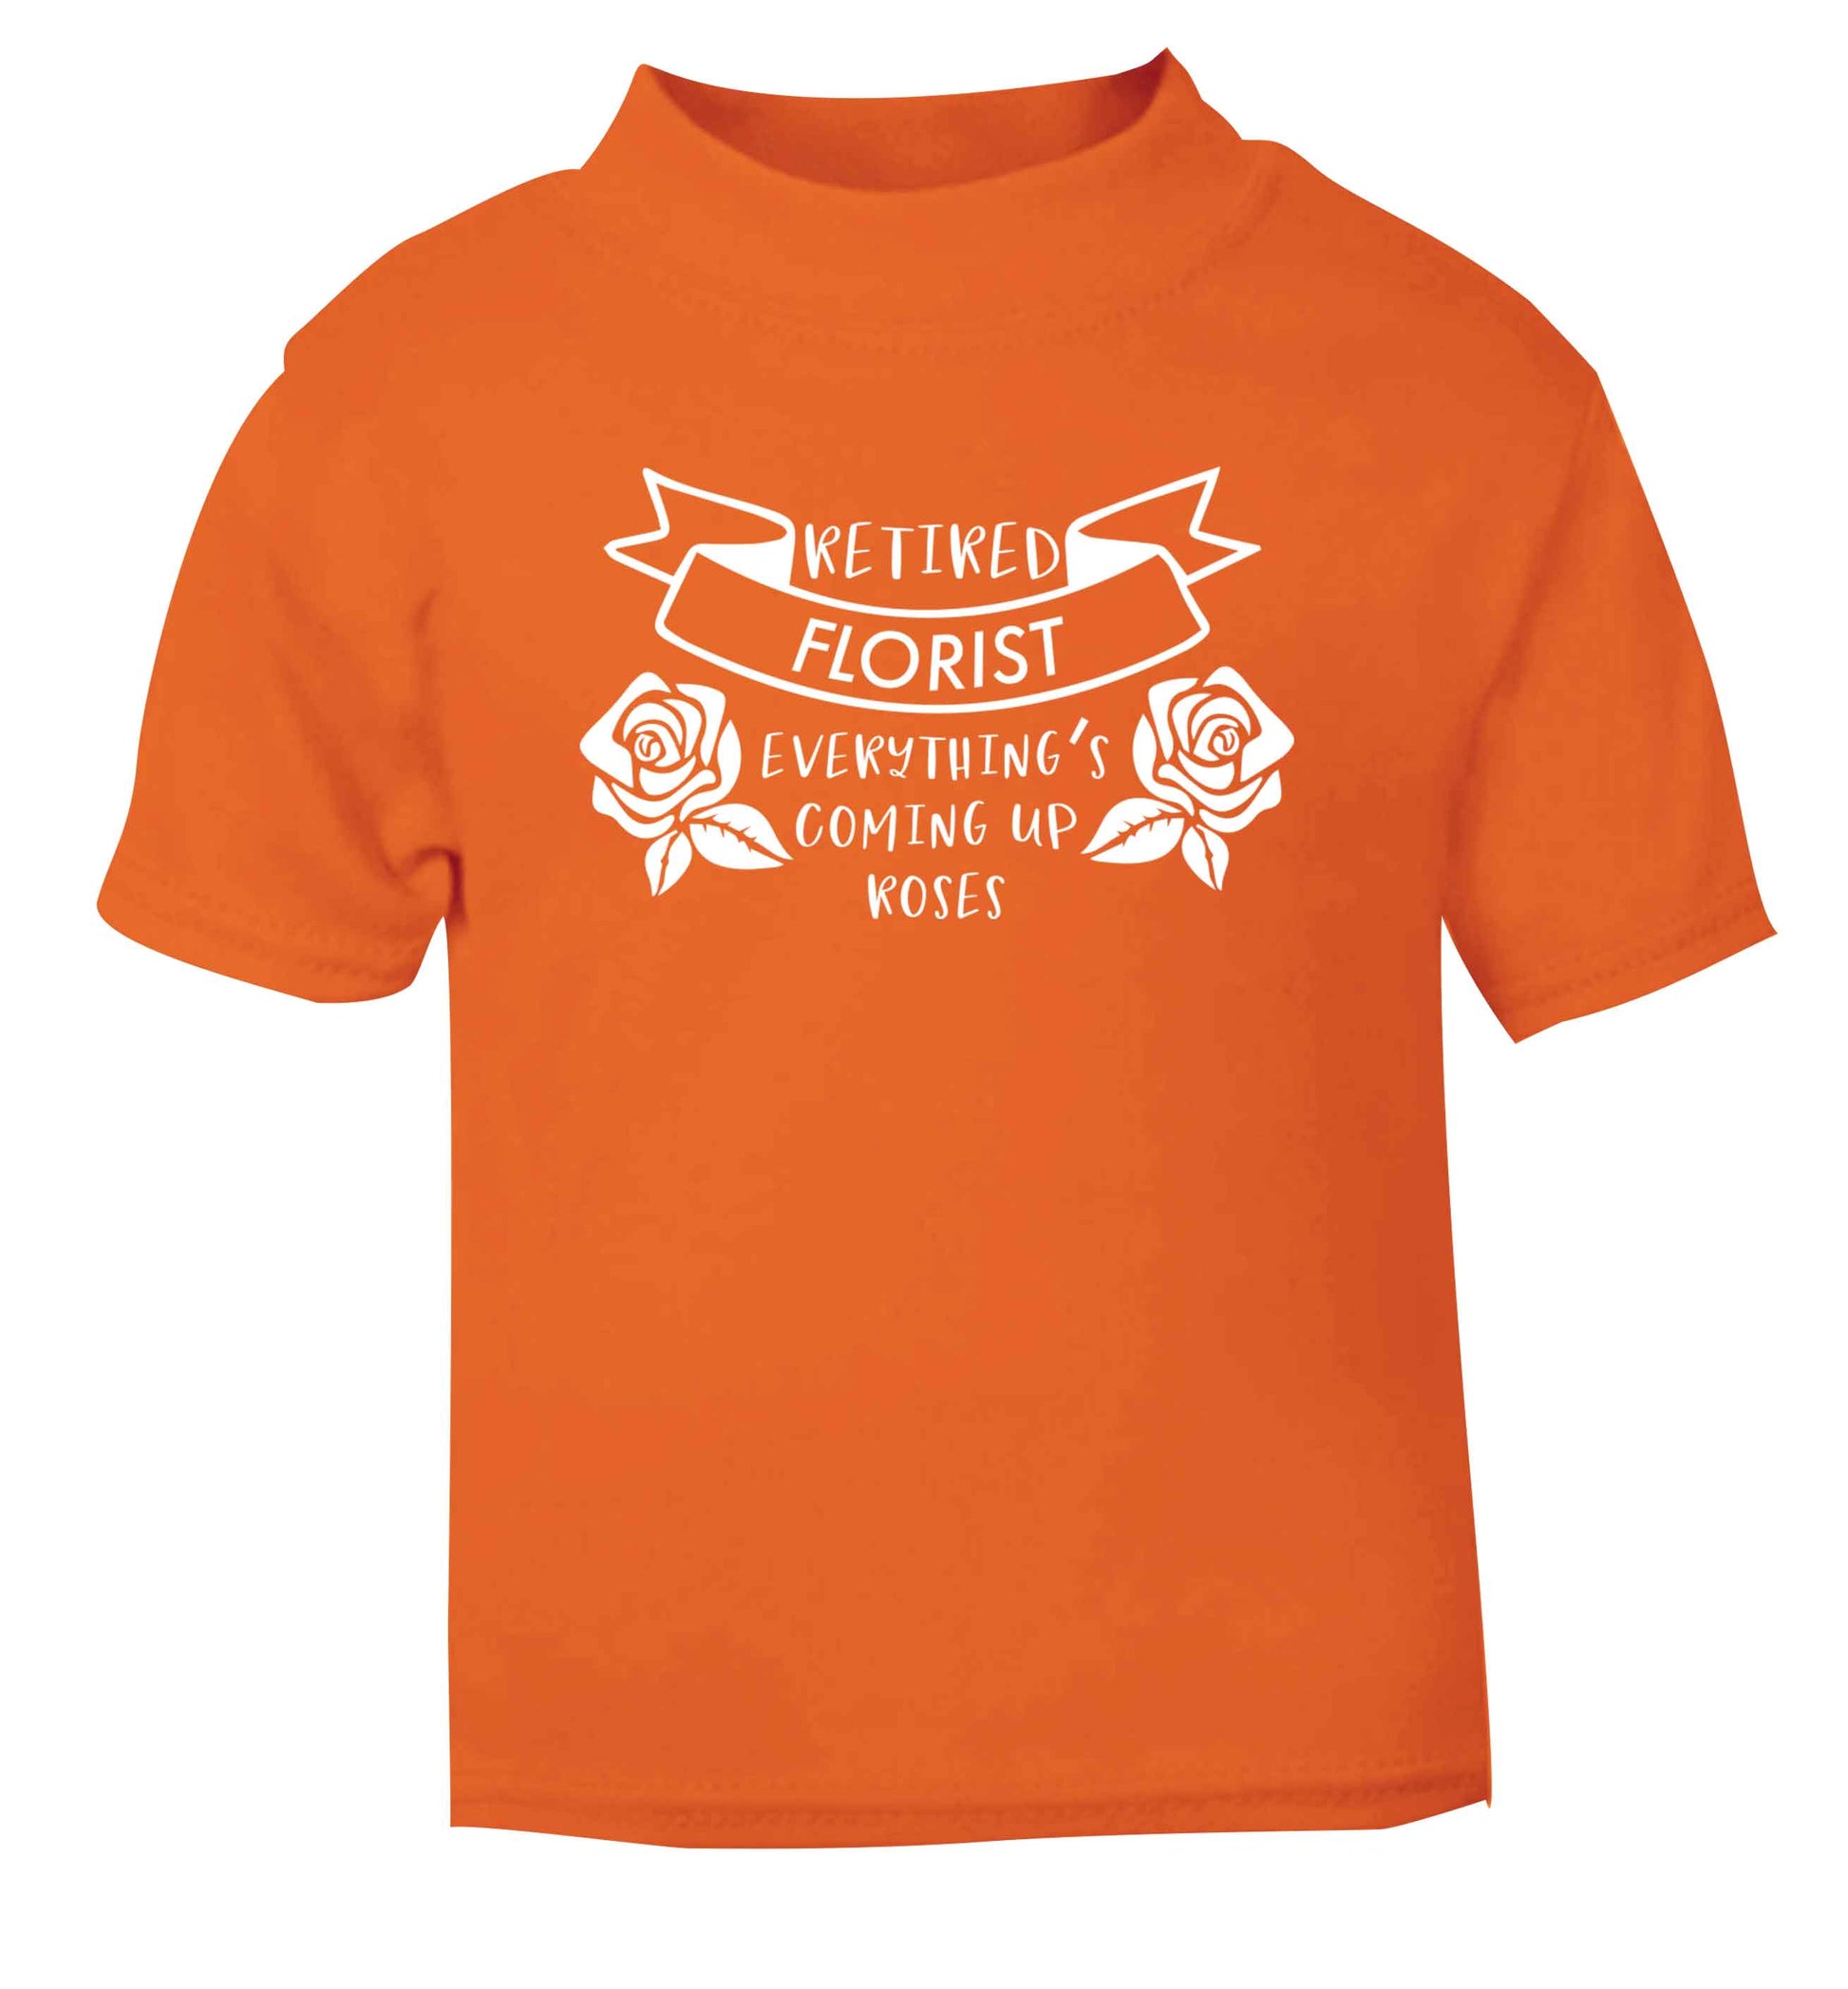 Retired florist everything's coming up roses orange Baby Toddler Tshirt 2 Years